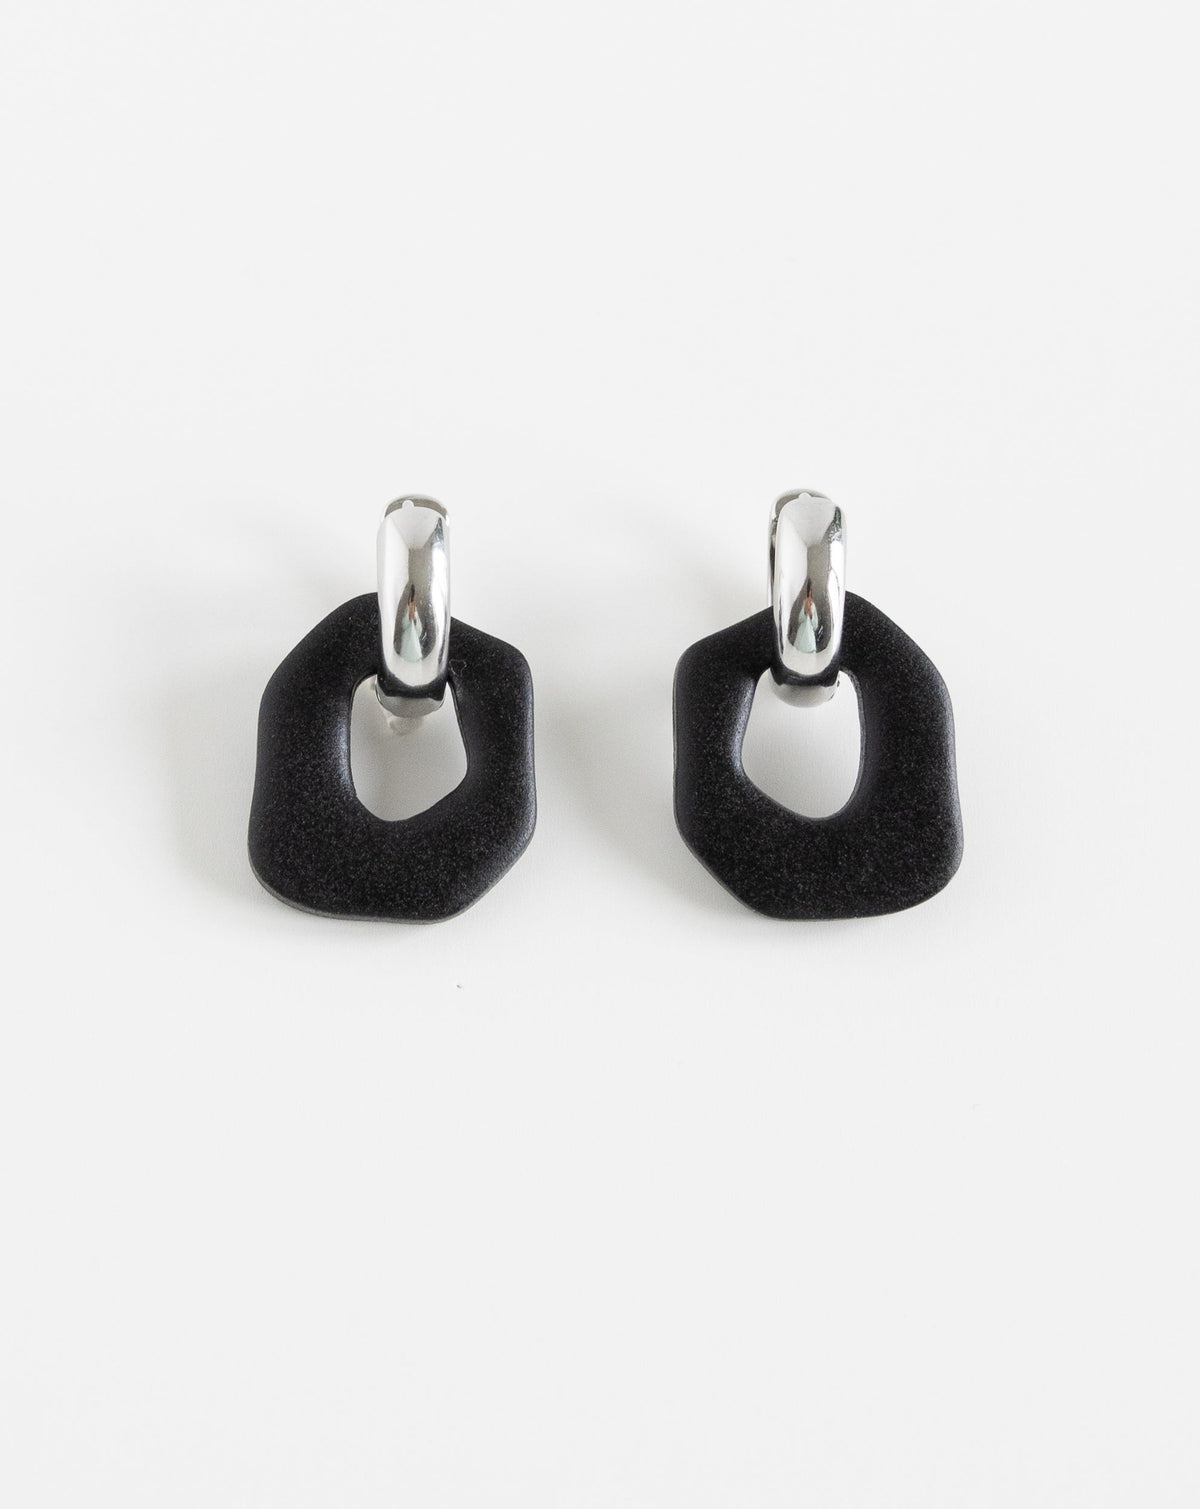 Darien earrings in Black color with silver hoops, front view